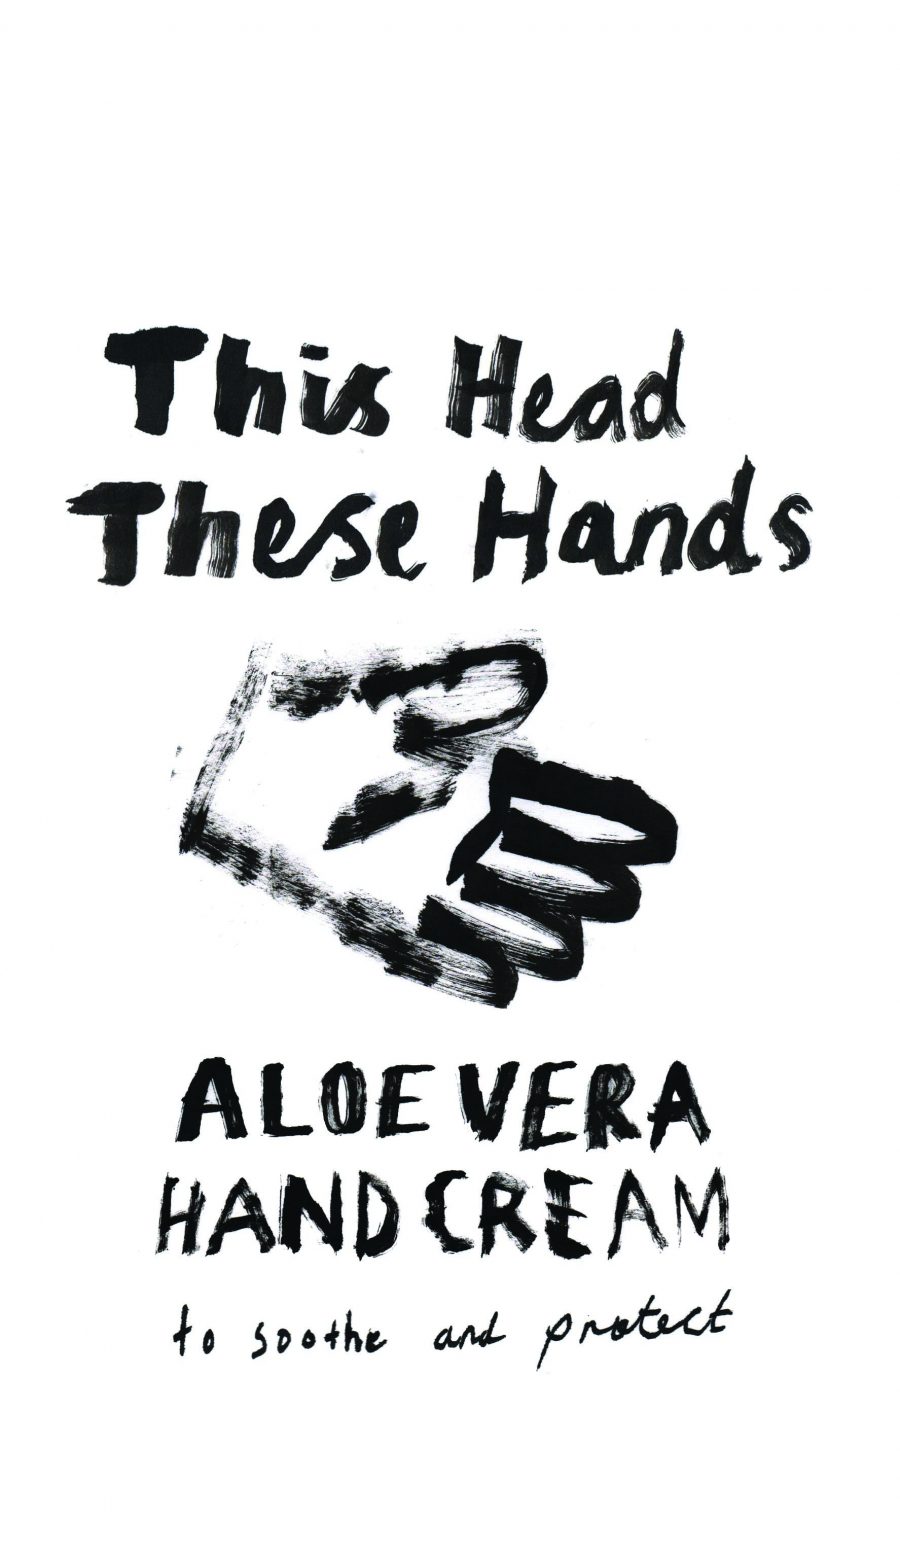 'This head, these hands. Aloe Vera hand cream to soothe and protect' painted in black on a white background. A hand is painted in black.